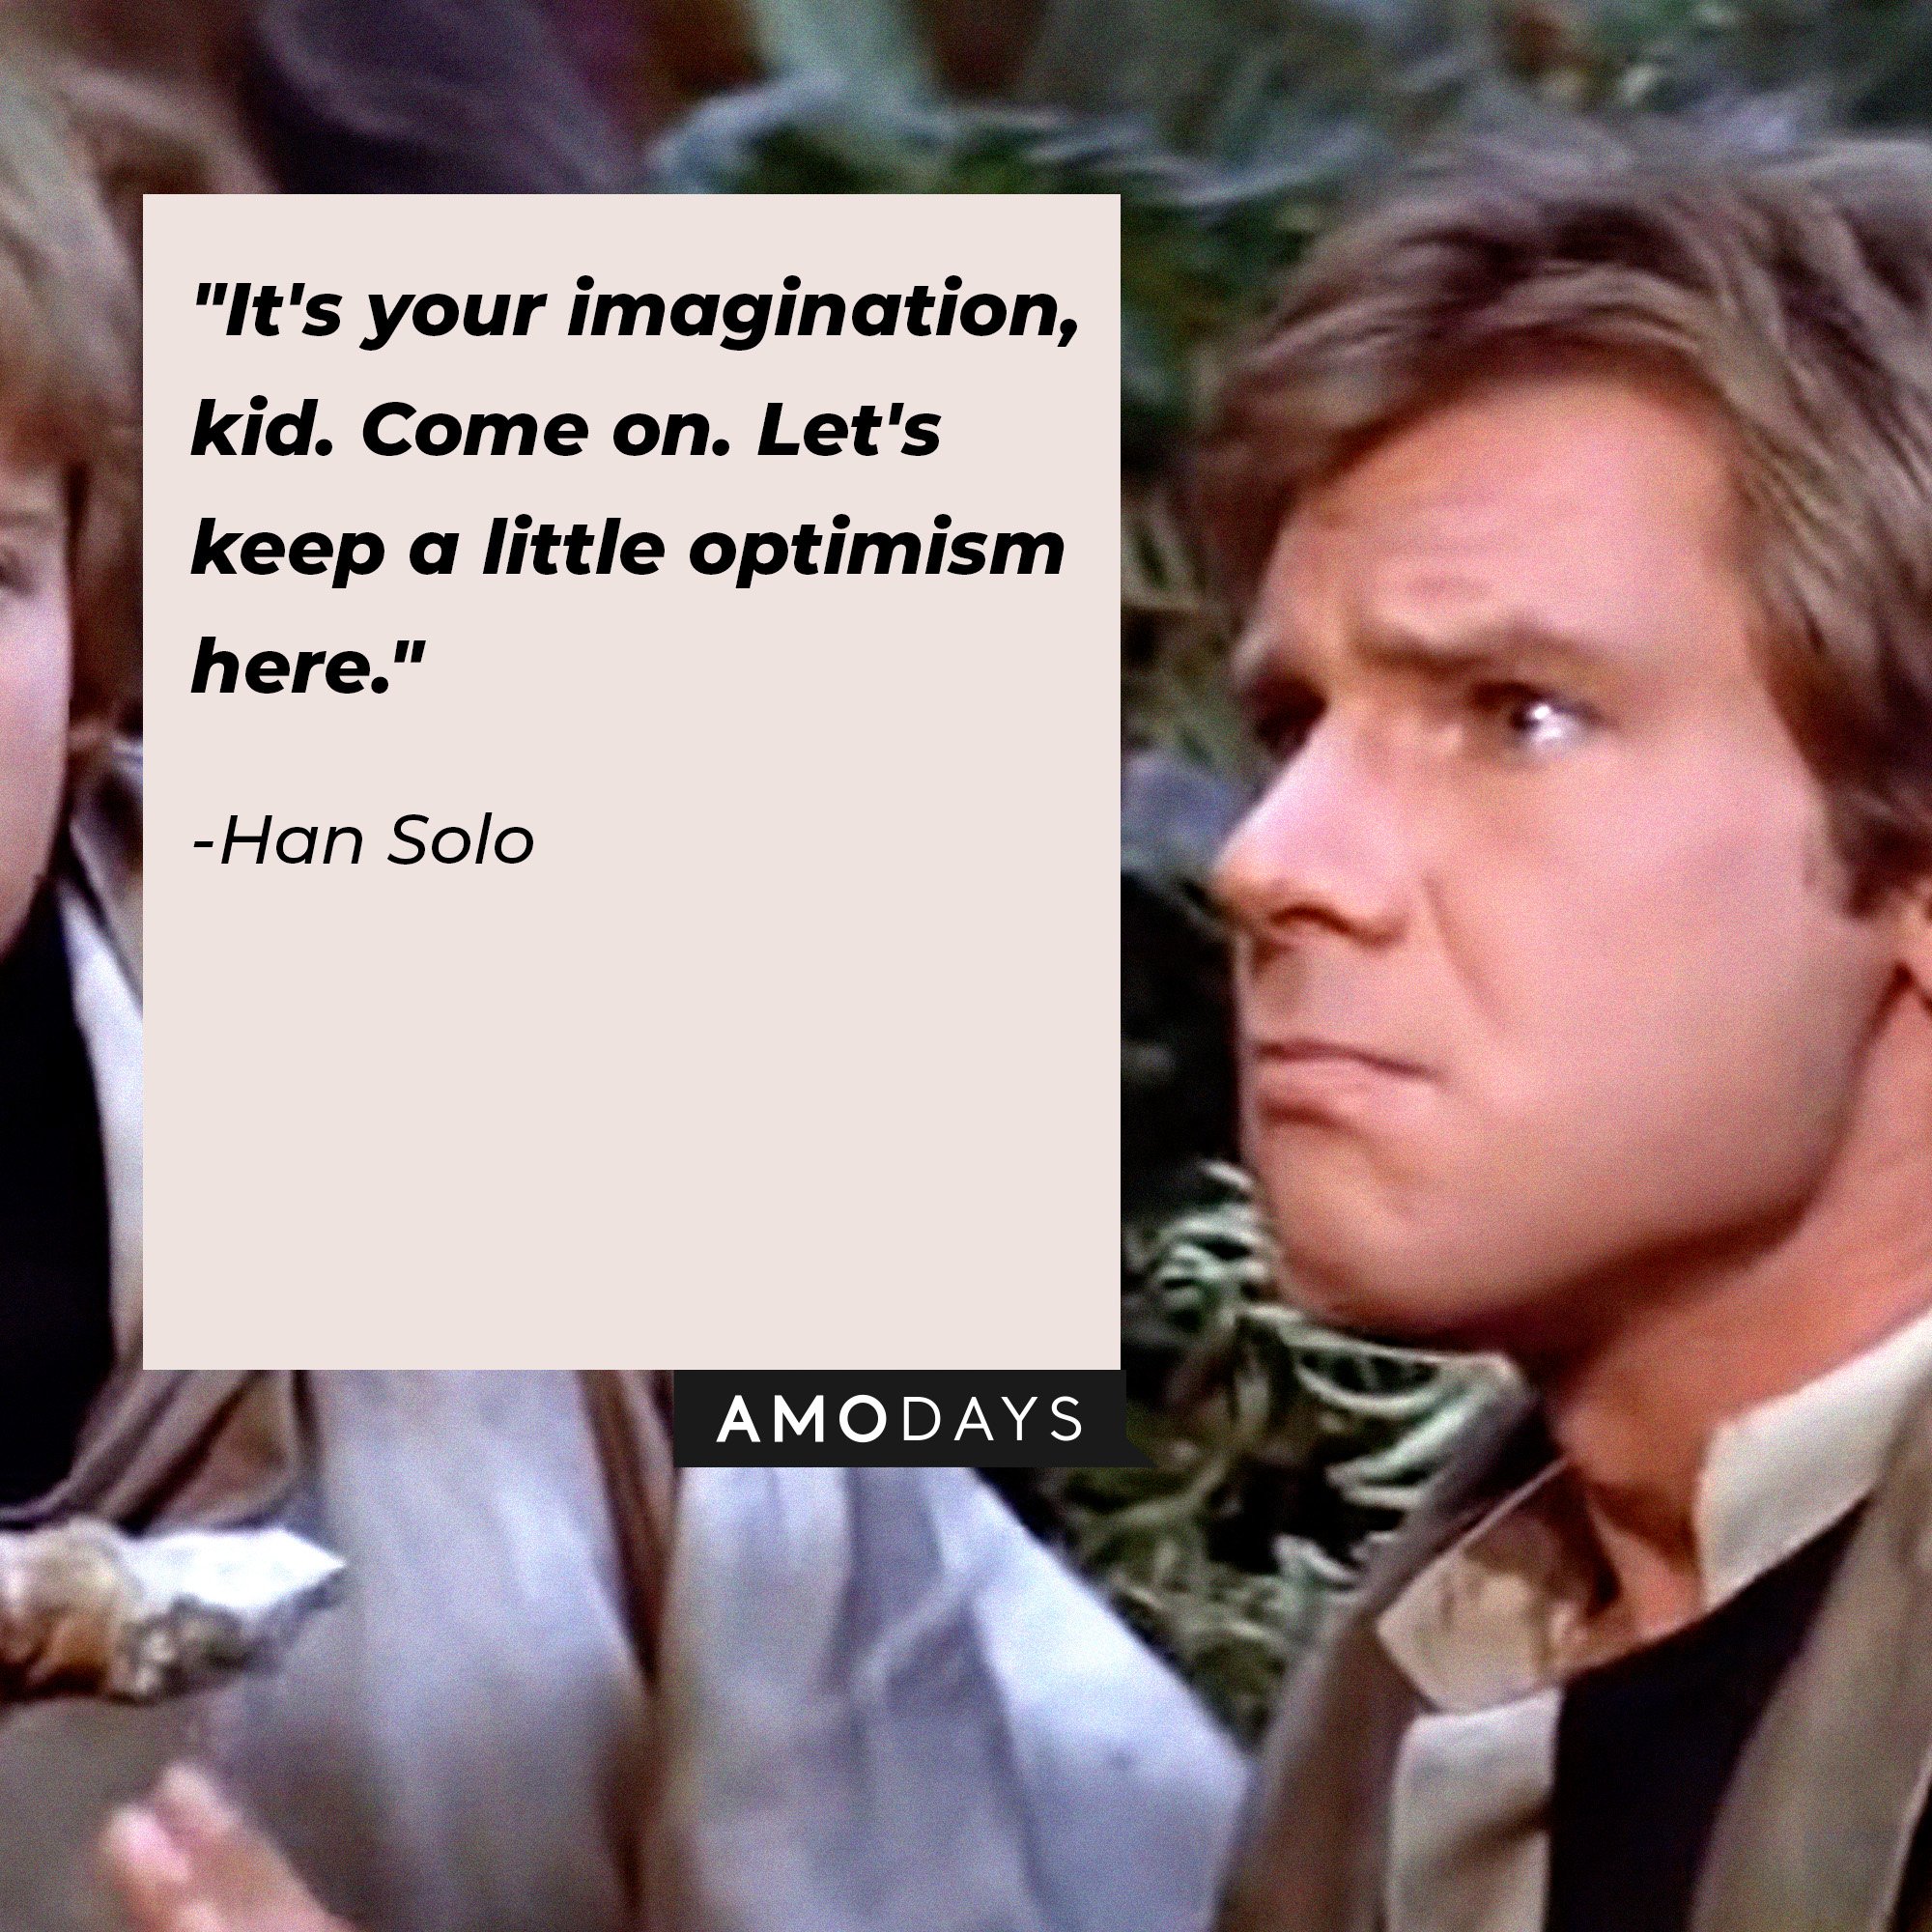 Han Solo’s quote: "It's your imagination, kid. Come on. Let's keep a little optimism here." | Image: AmoDays